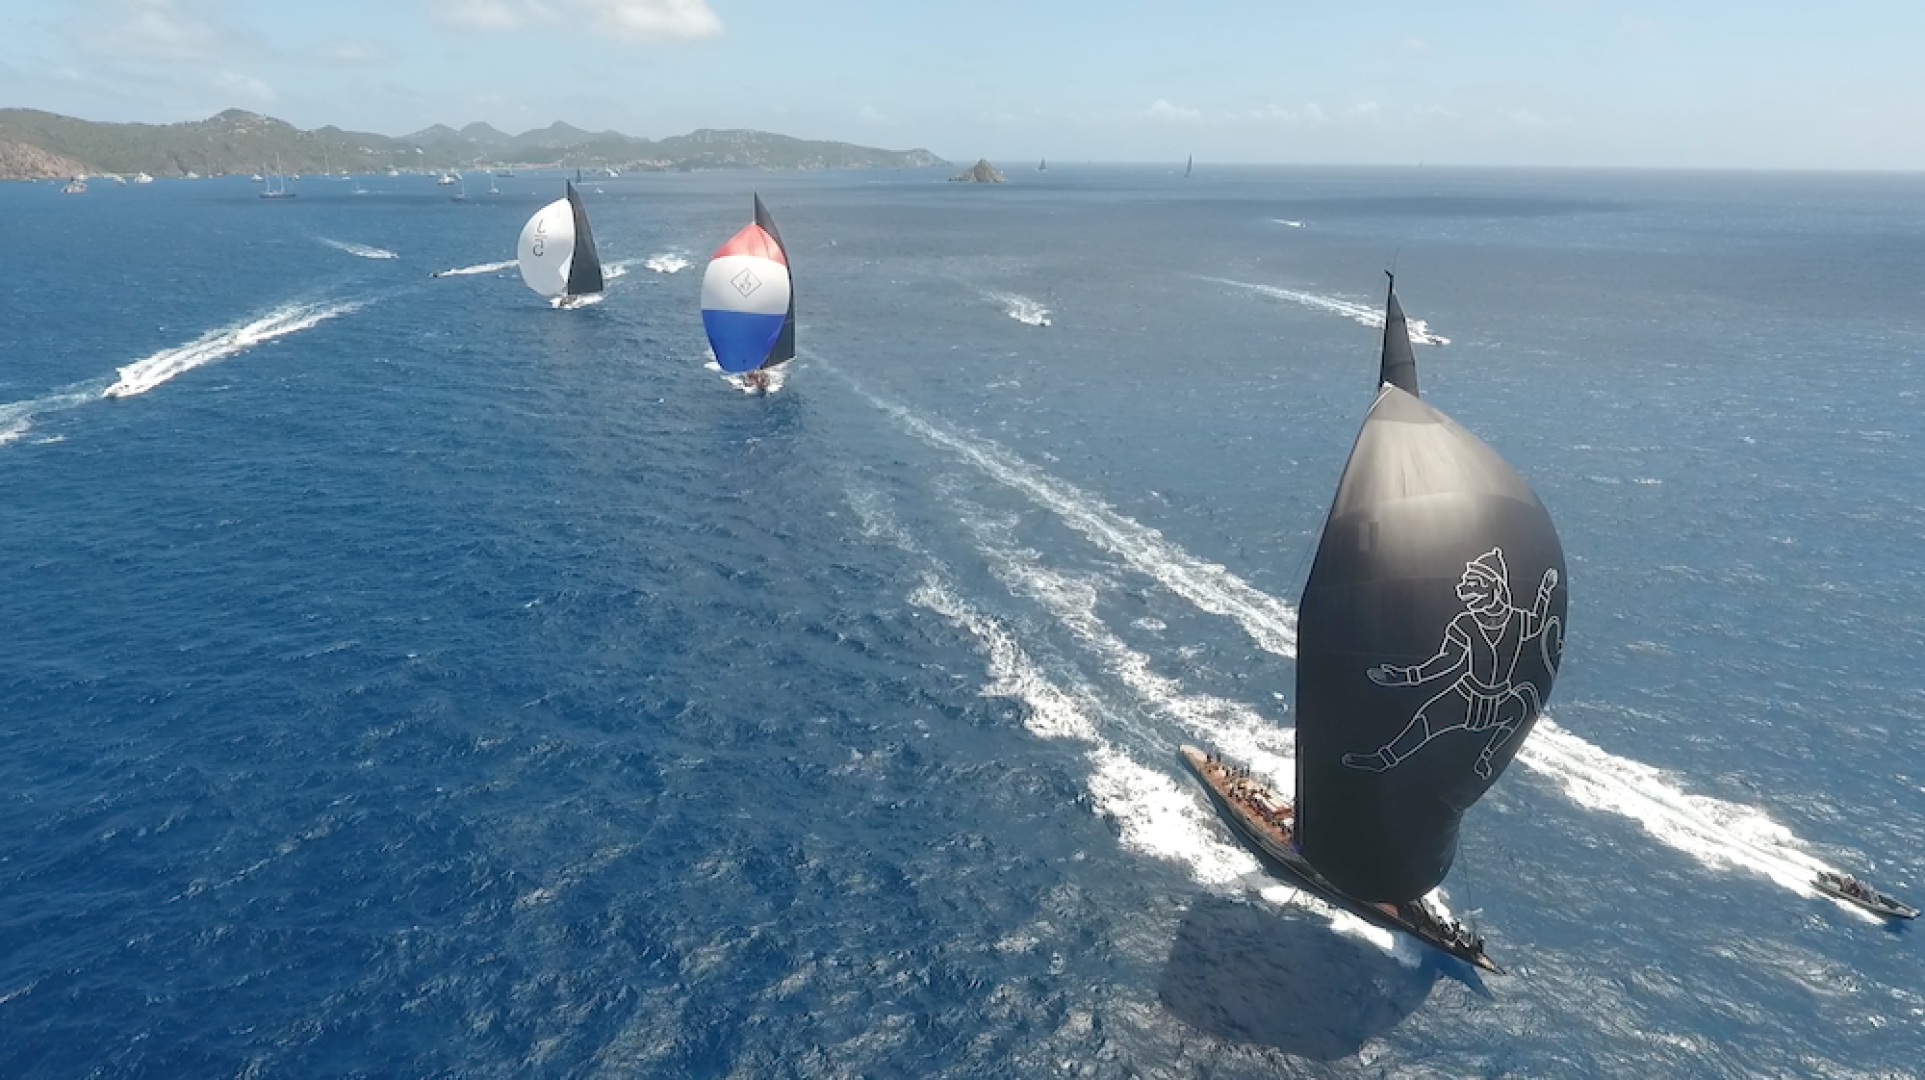 The fleet race downwind on the opening day of the St Barth's Bucket